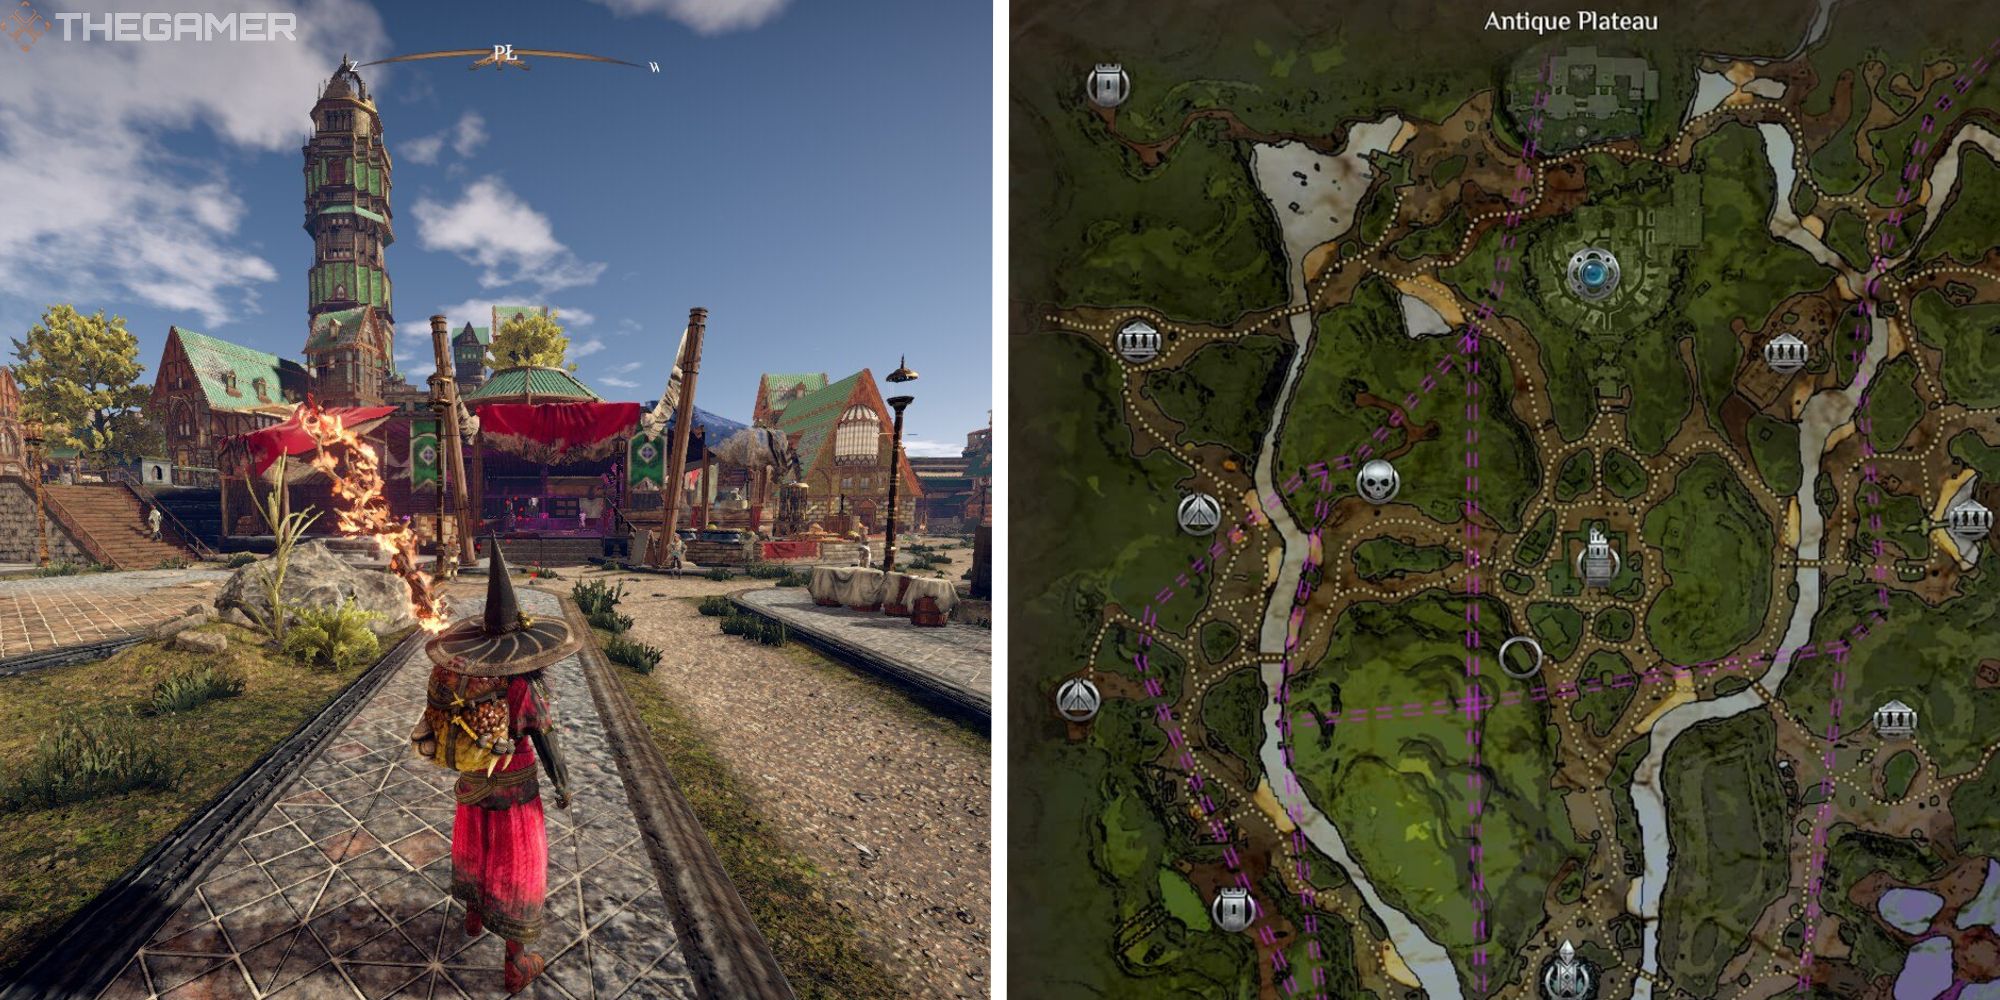 image of player in harmattan next to image of antique plateau map